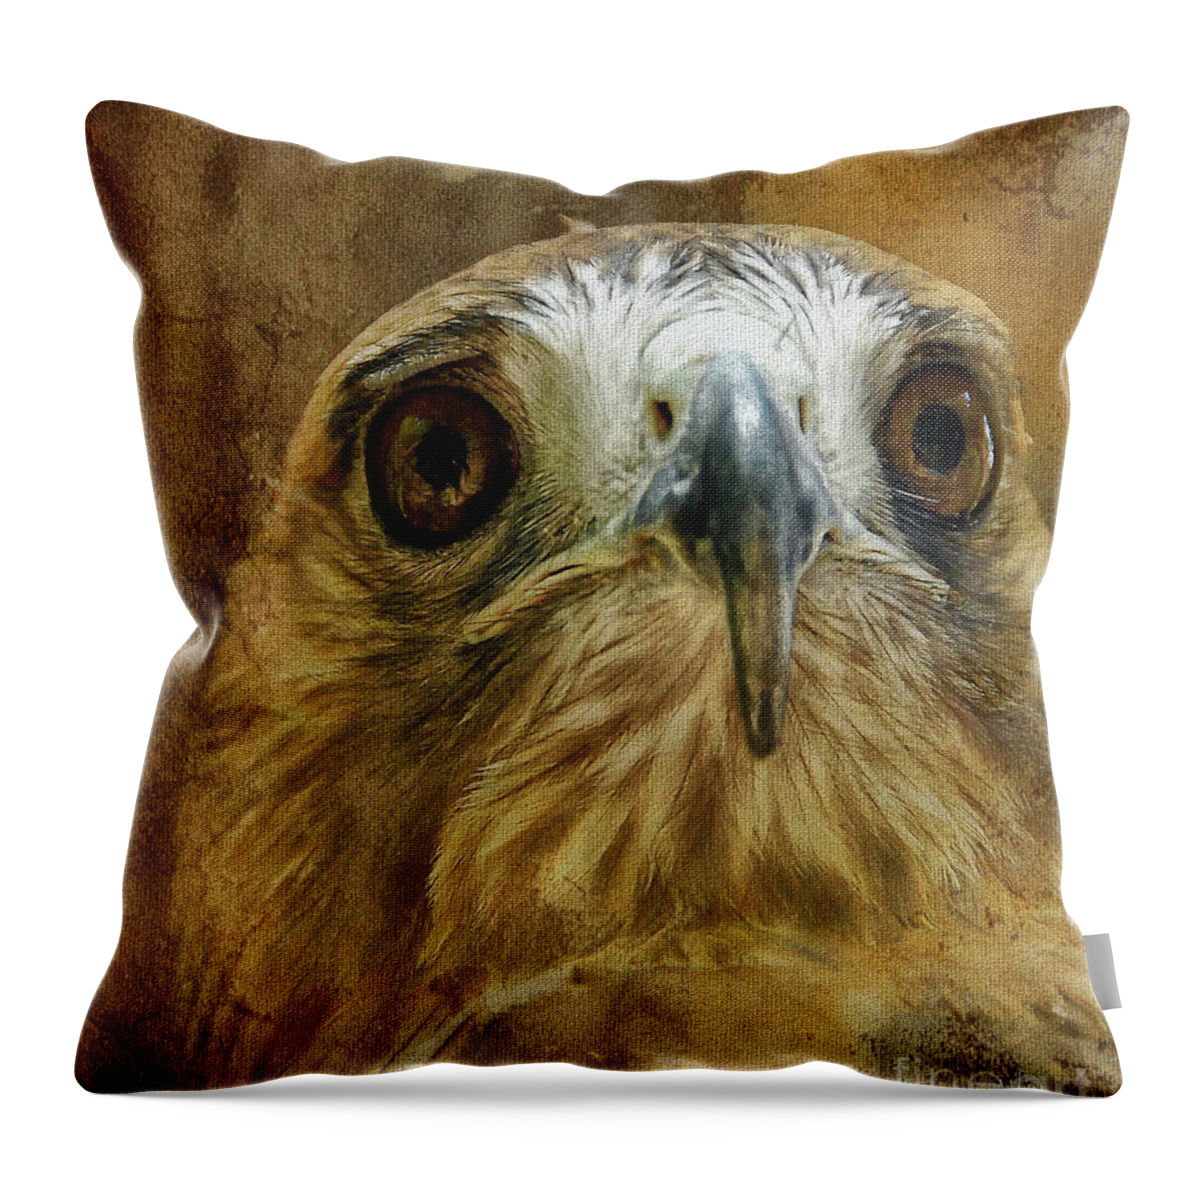 Hawk Throw Pillow featuring the photograph Your Majesty by Lois Bryan